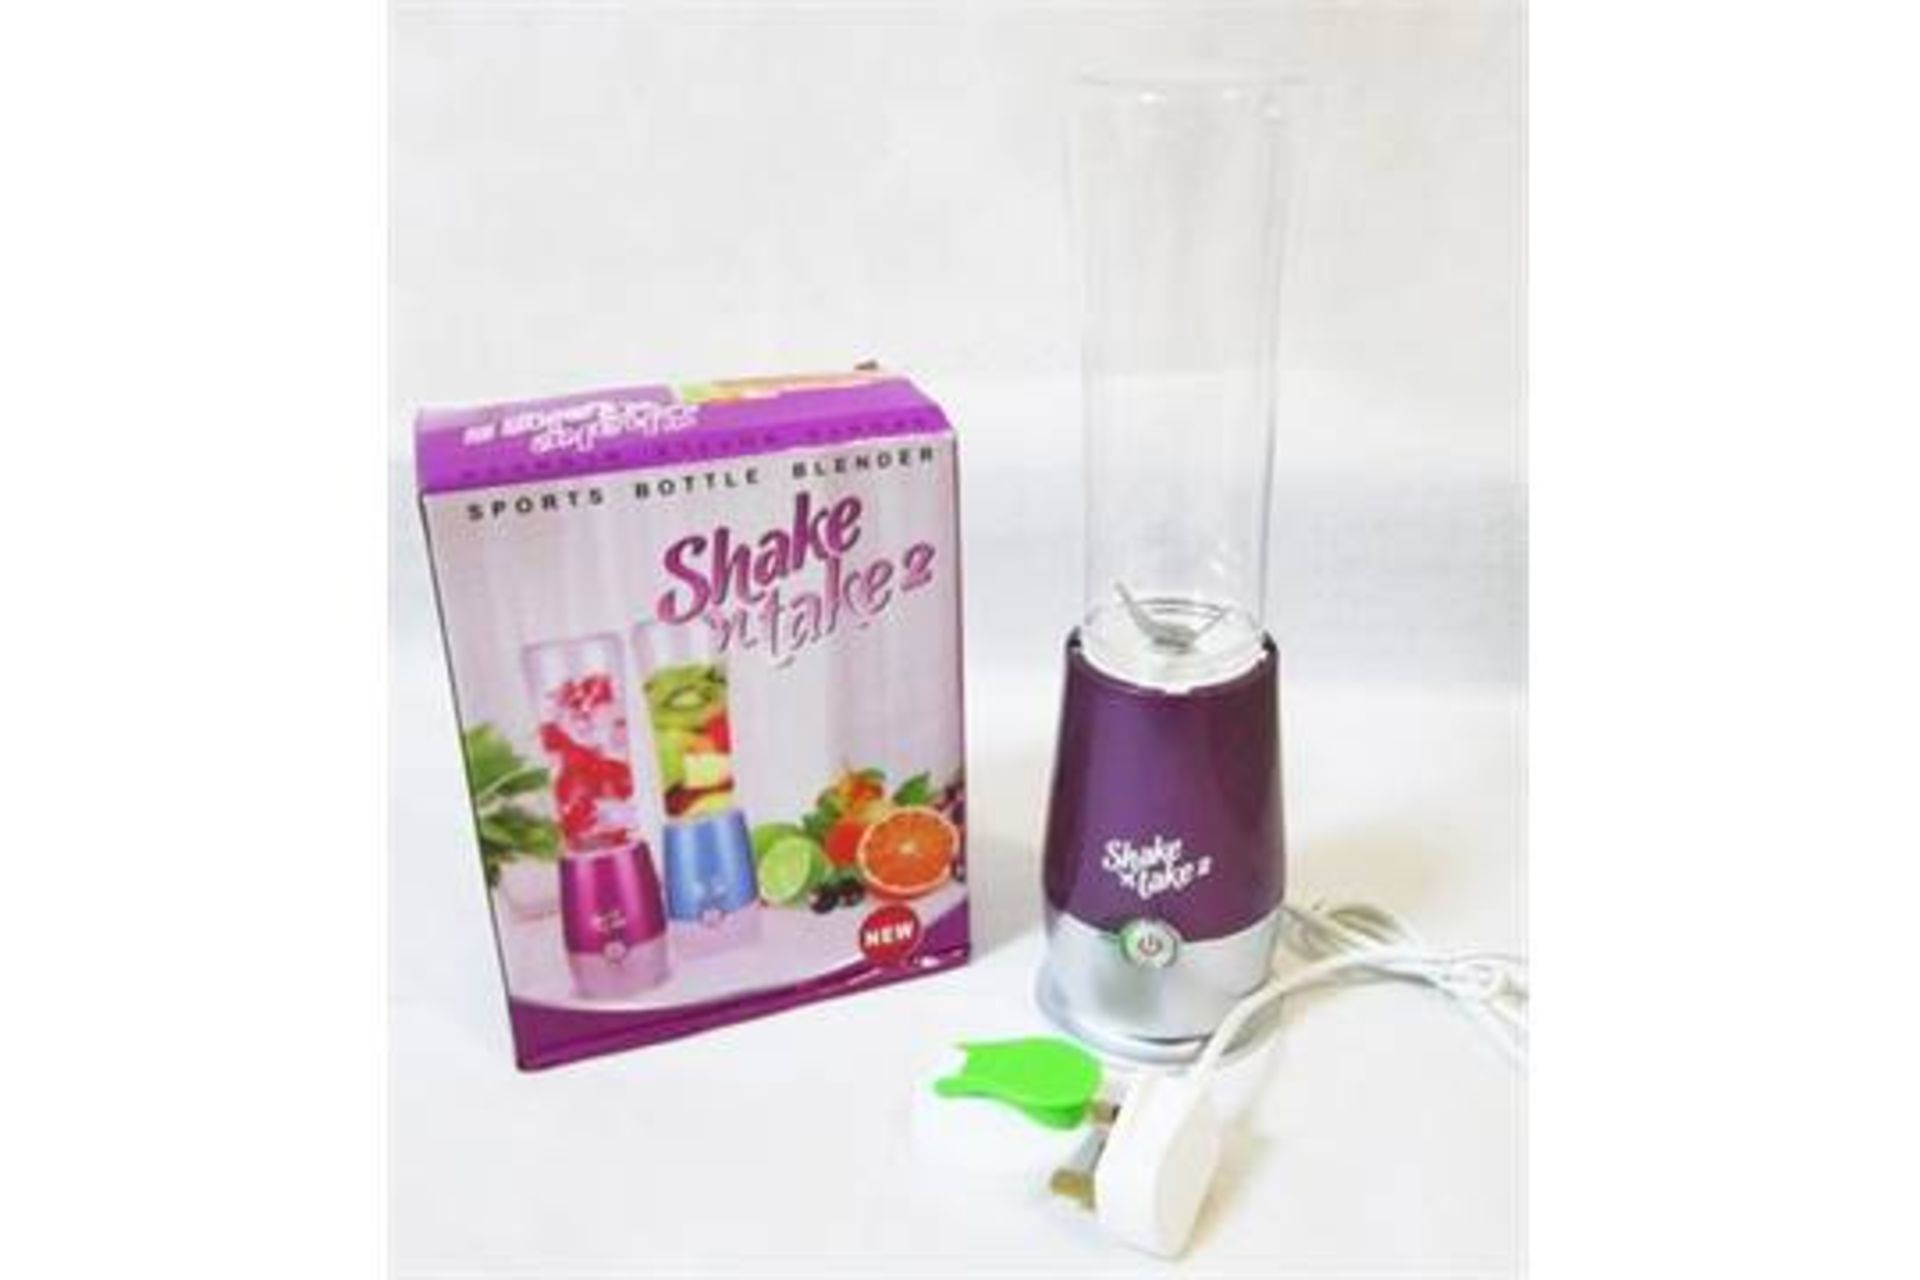 BOXED BRAND NEW AND SEALED SHAKE AND TAKE TWO MINI BLENDER SMOOTHIE MAKER WITH ICE CRUSHER AND